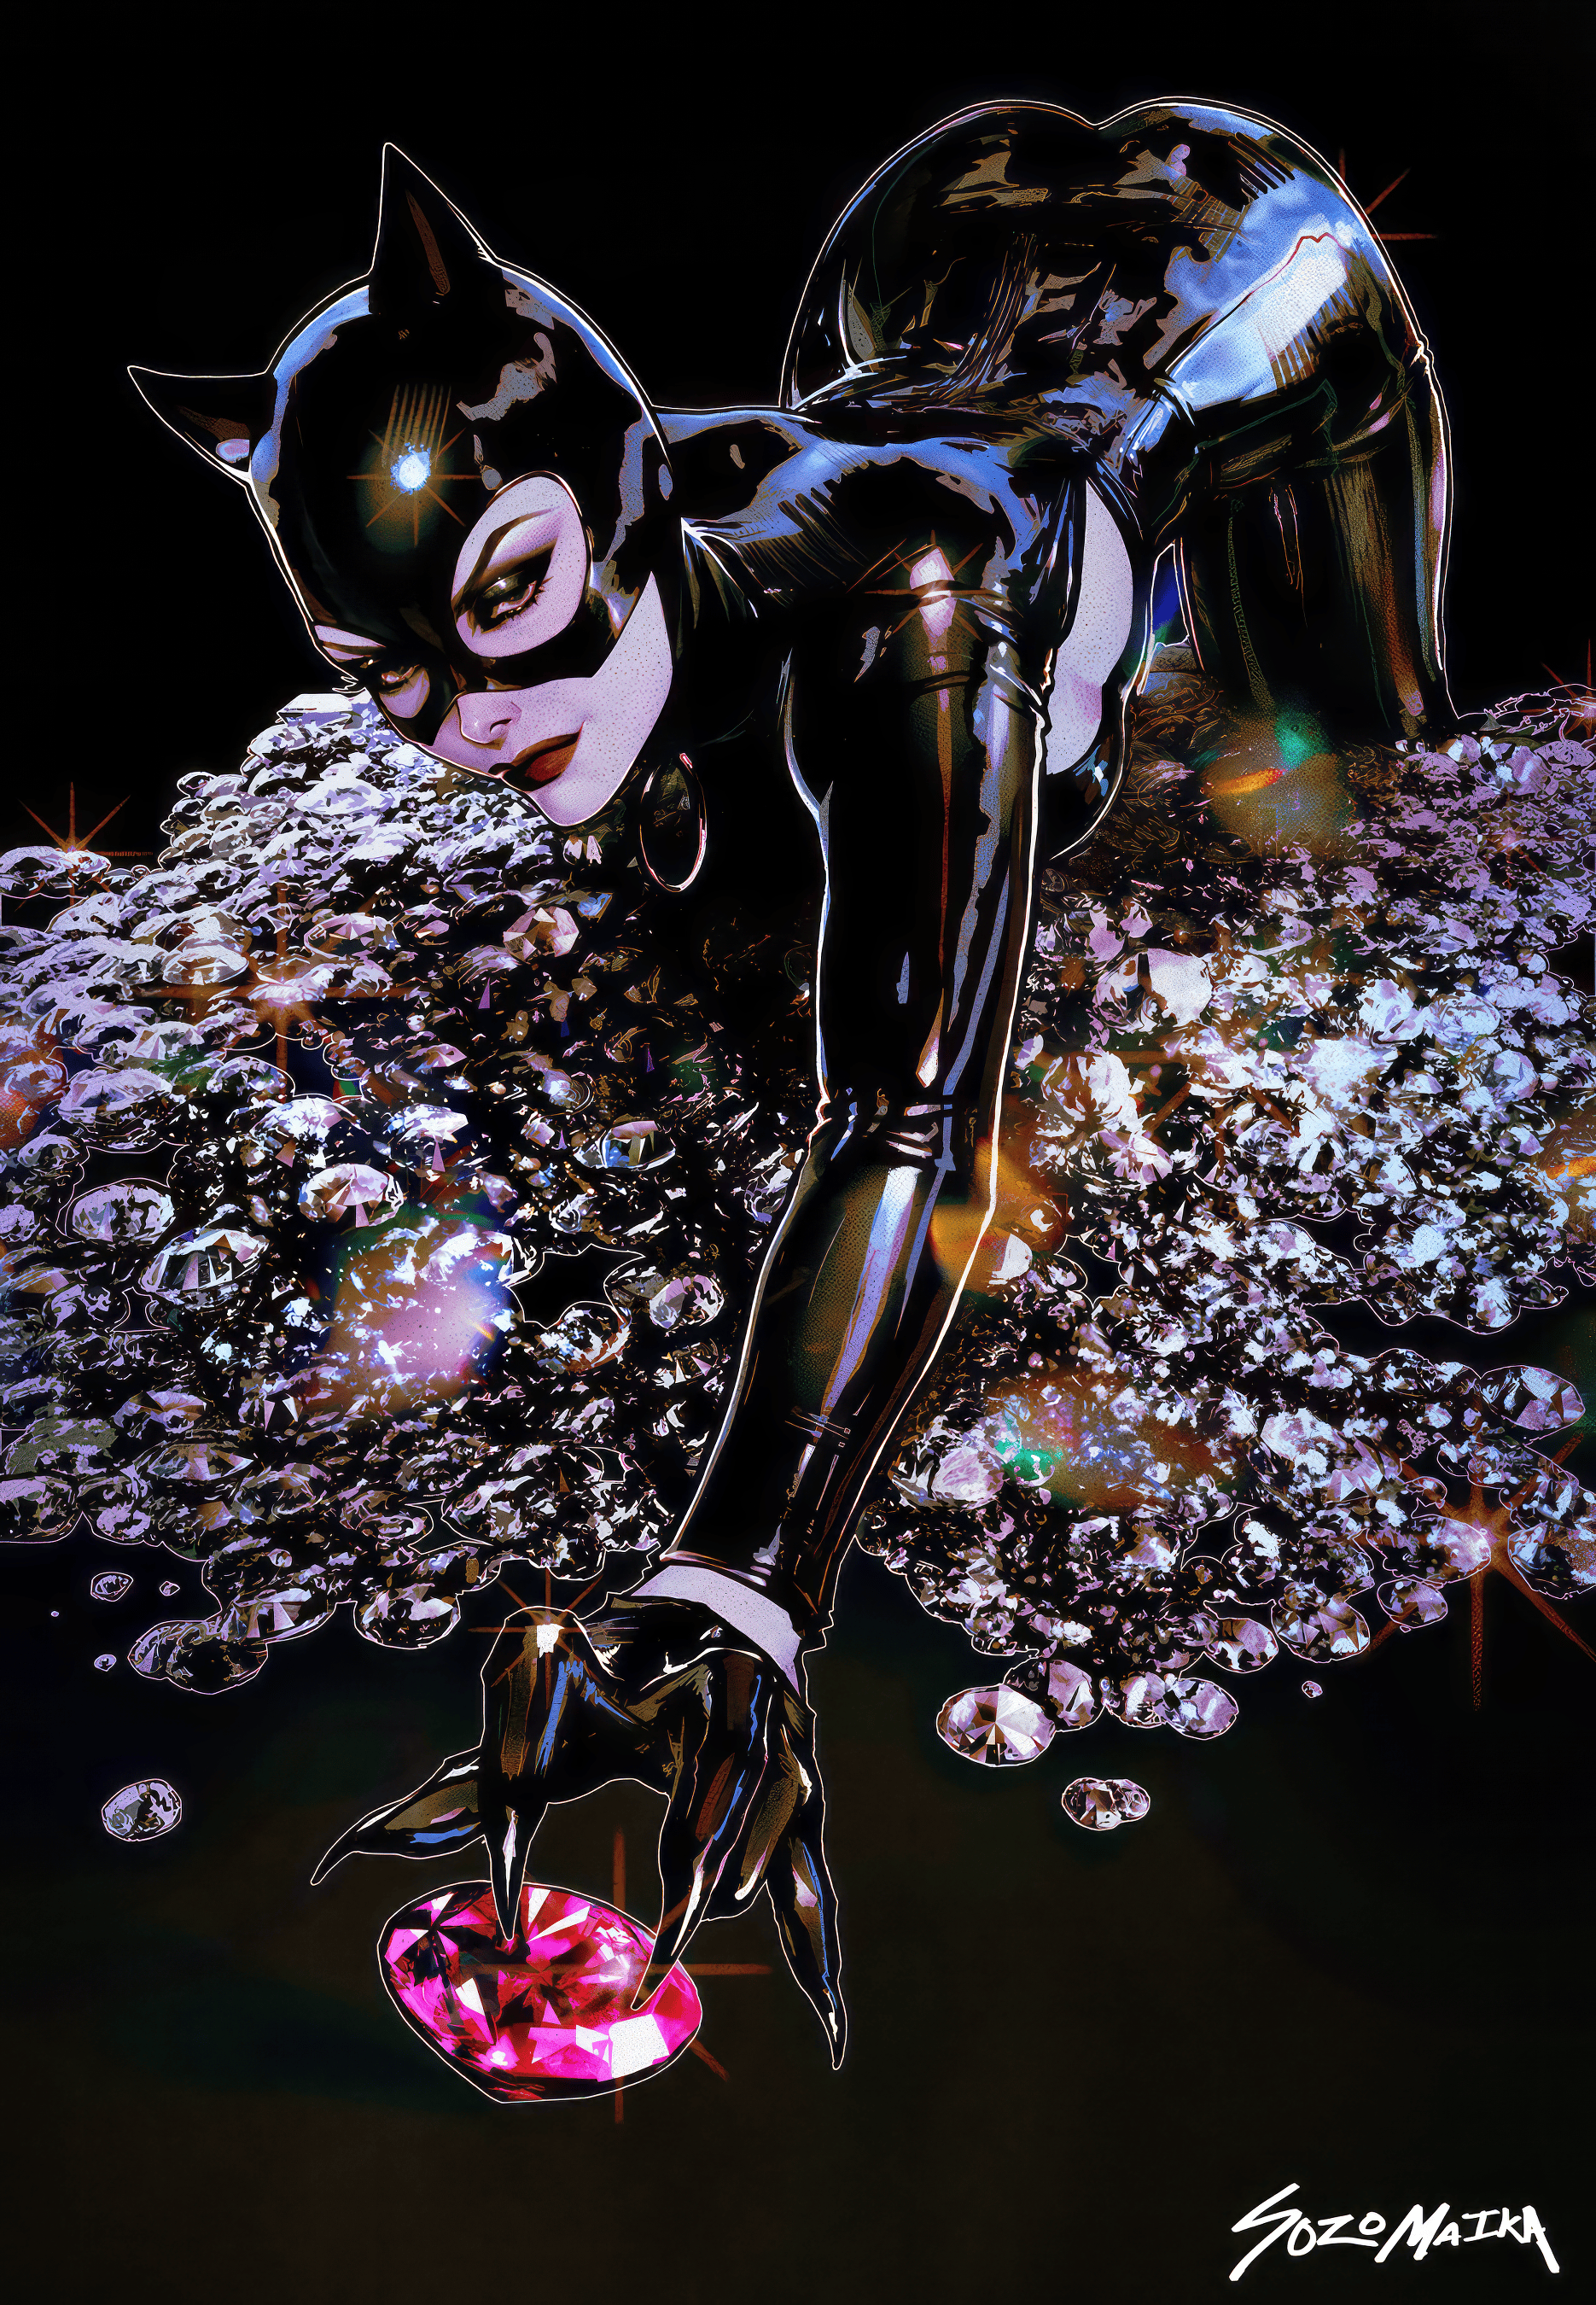 General 1870x2700 digital painting painting Catwoman diamonds jewels SOZOMAIKA bent over minimalism simple background gems black background latex bodysuit face mask looking at viewer long nails signature portrait display DC Comics